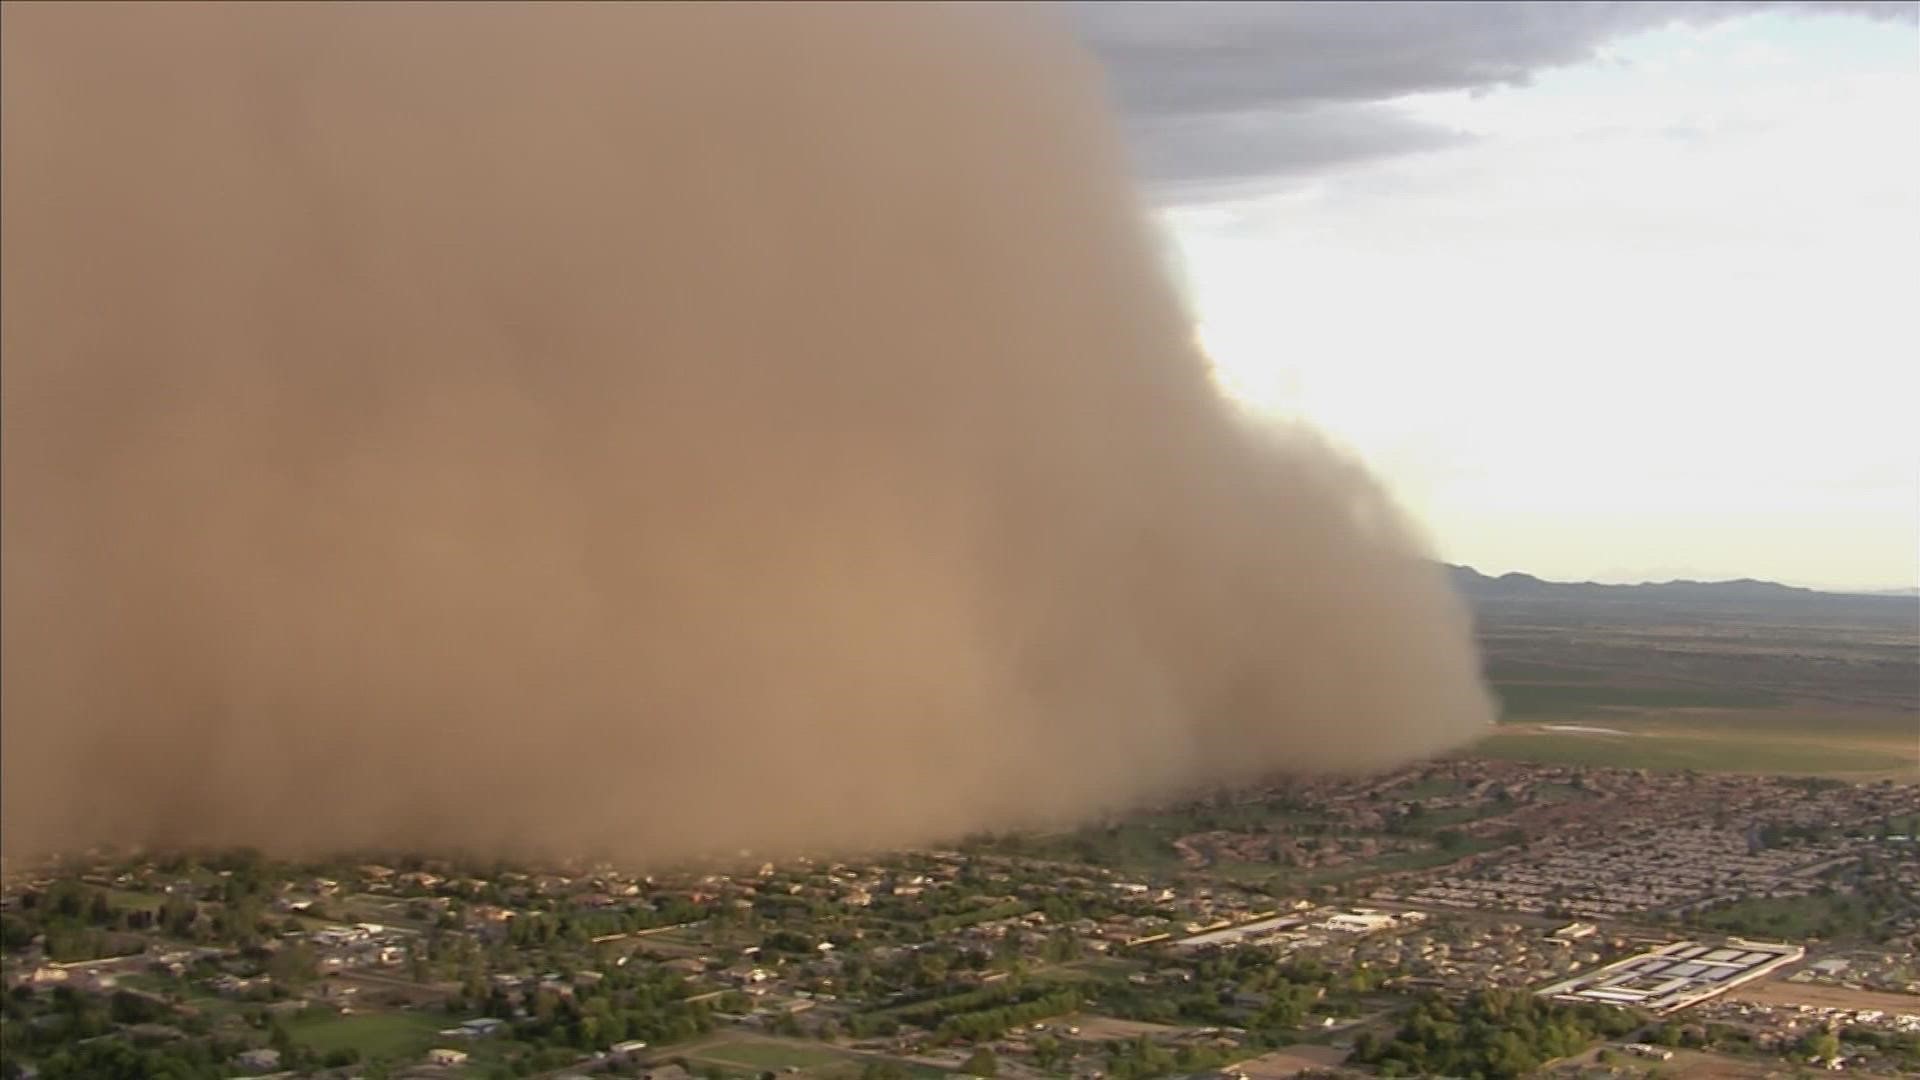 The dust storm hit southeast of Phoenix on Friday, Sept. 2, 2022.